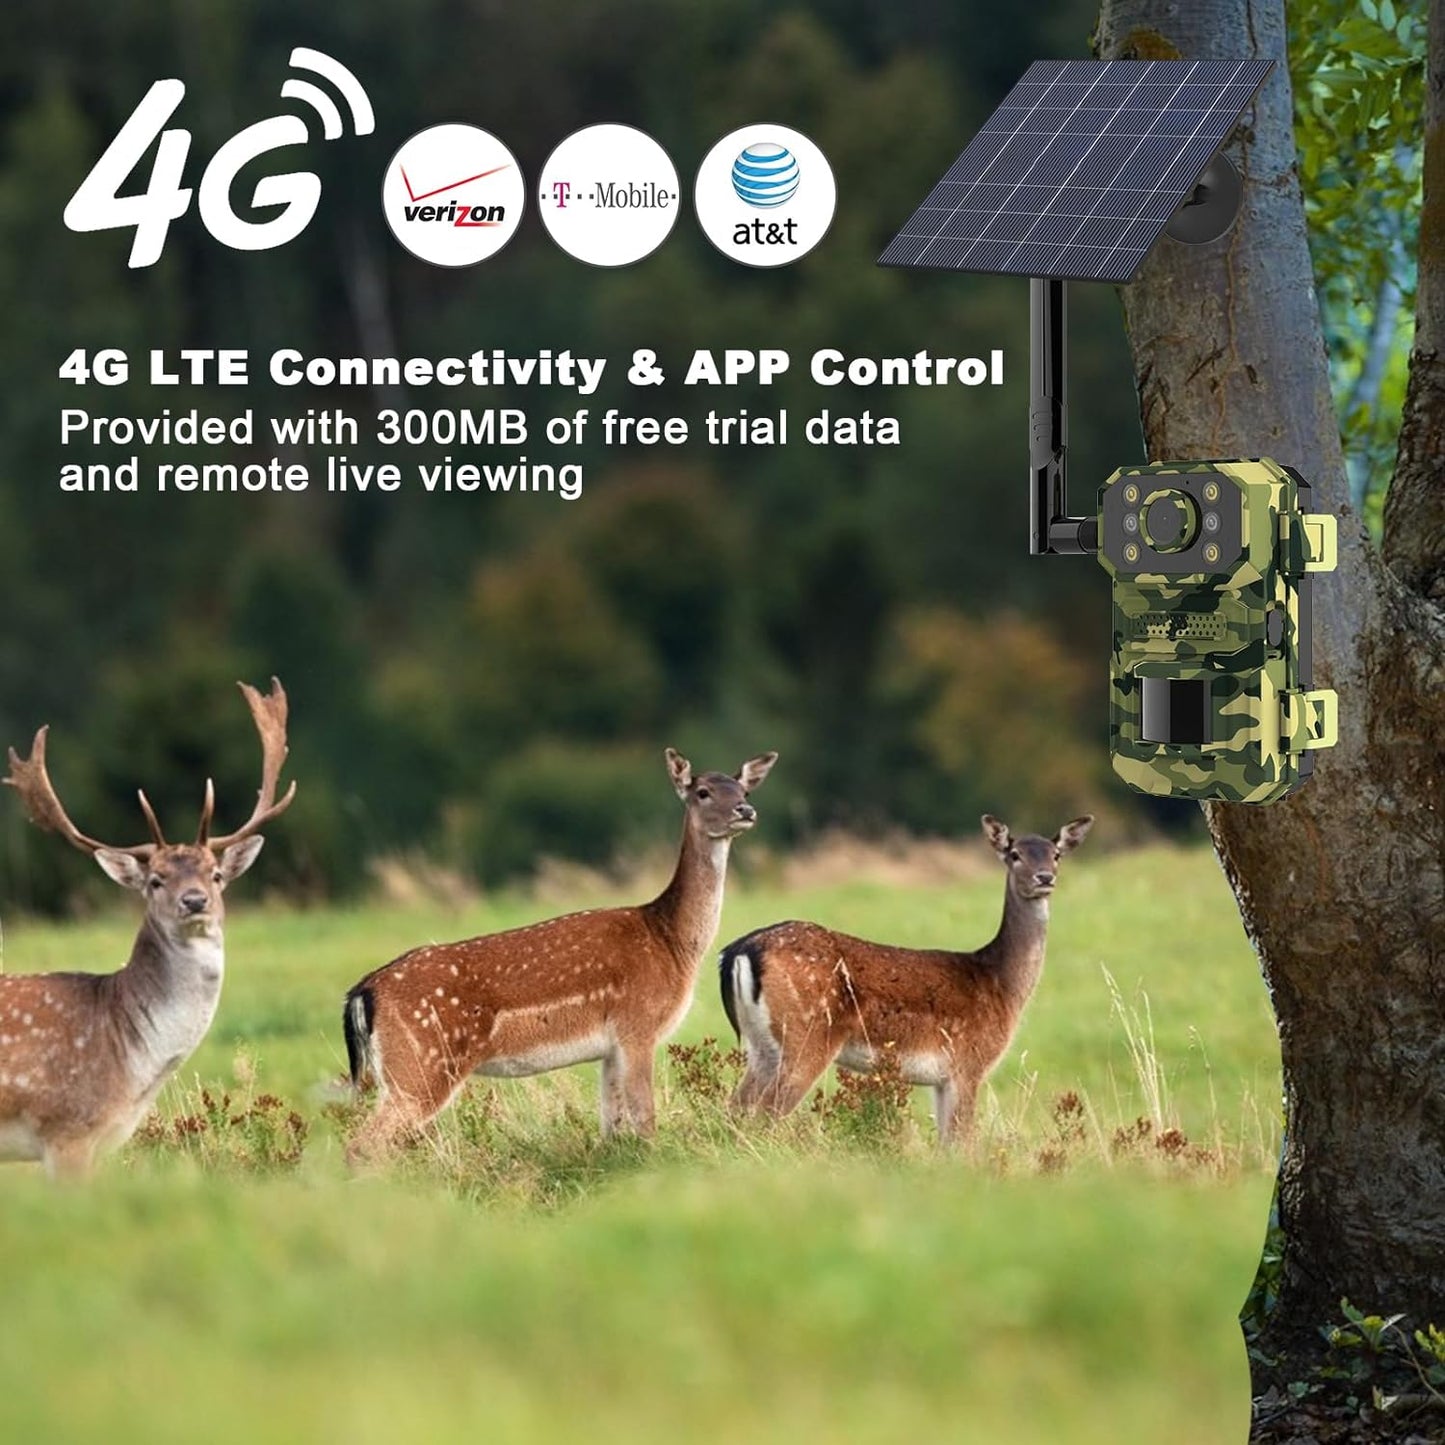 4G LTE Cellular Trail Camera 2.7K 14MP Photos,5W Solar Hunting Camera Work with Pre-Installed SIM Card Only,Wildlife Camera with 7800mAh Battery,PIR Motion,Night Vision,IP67,Cloud/Local S